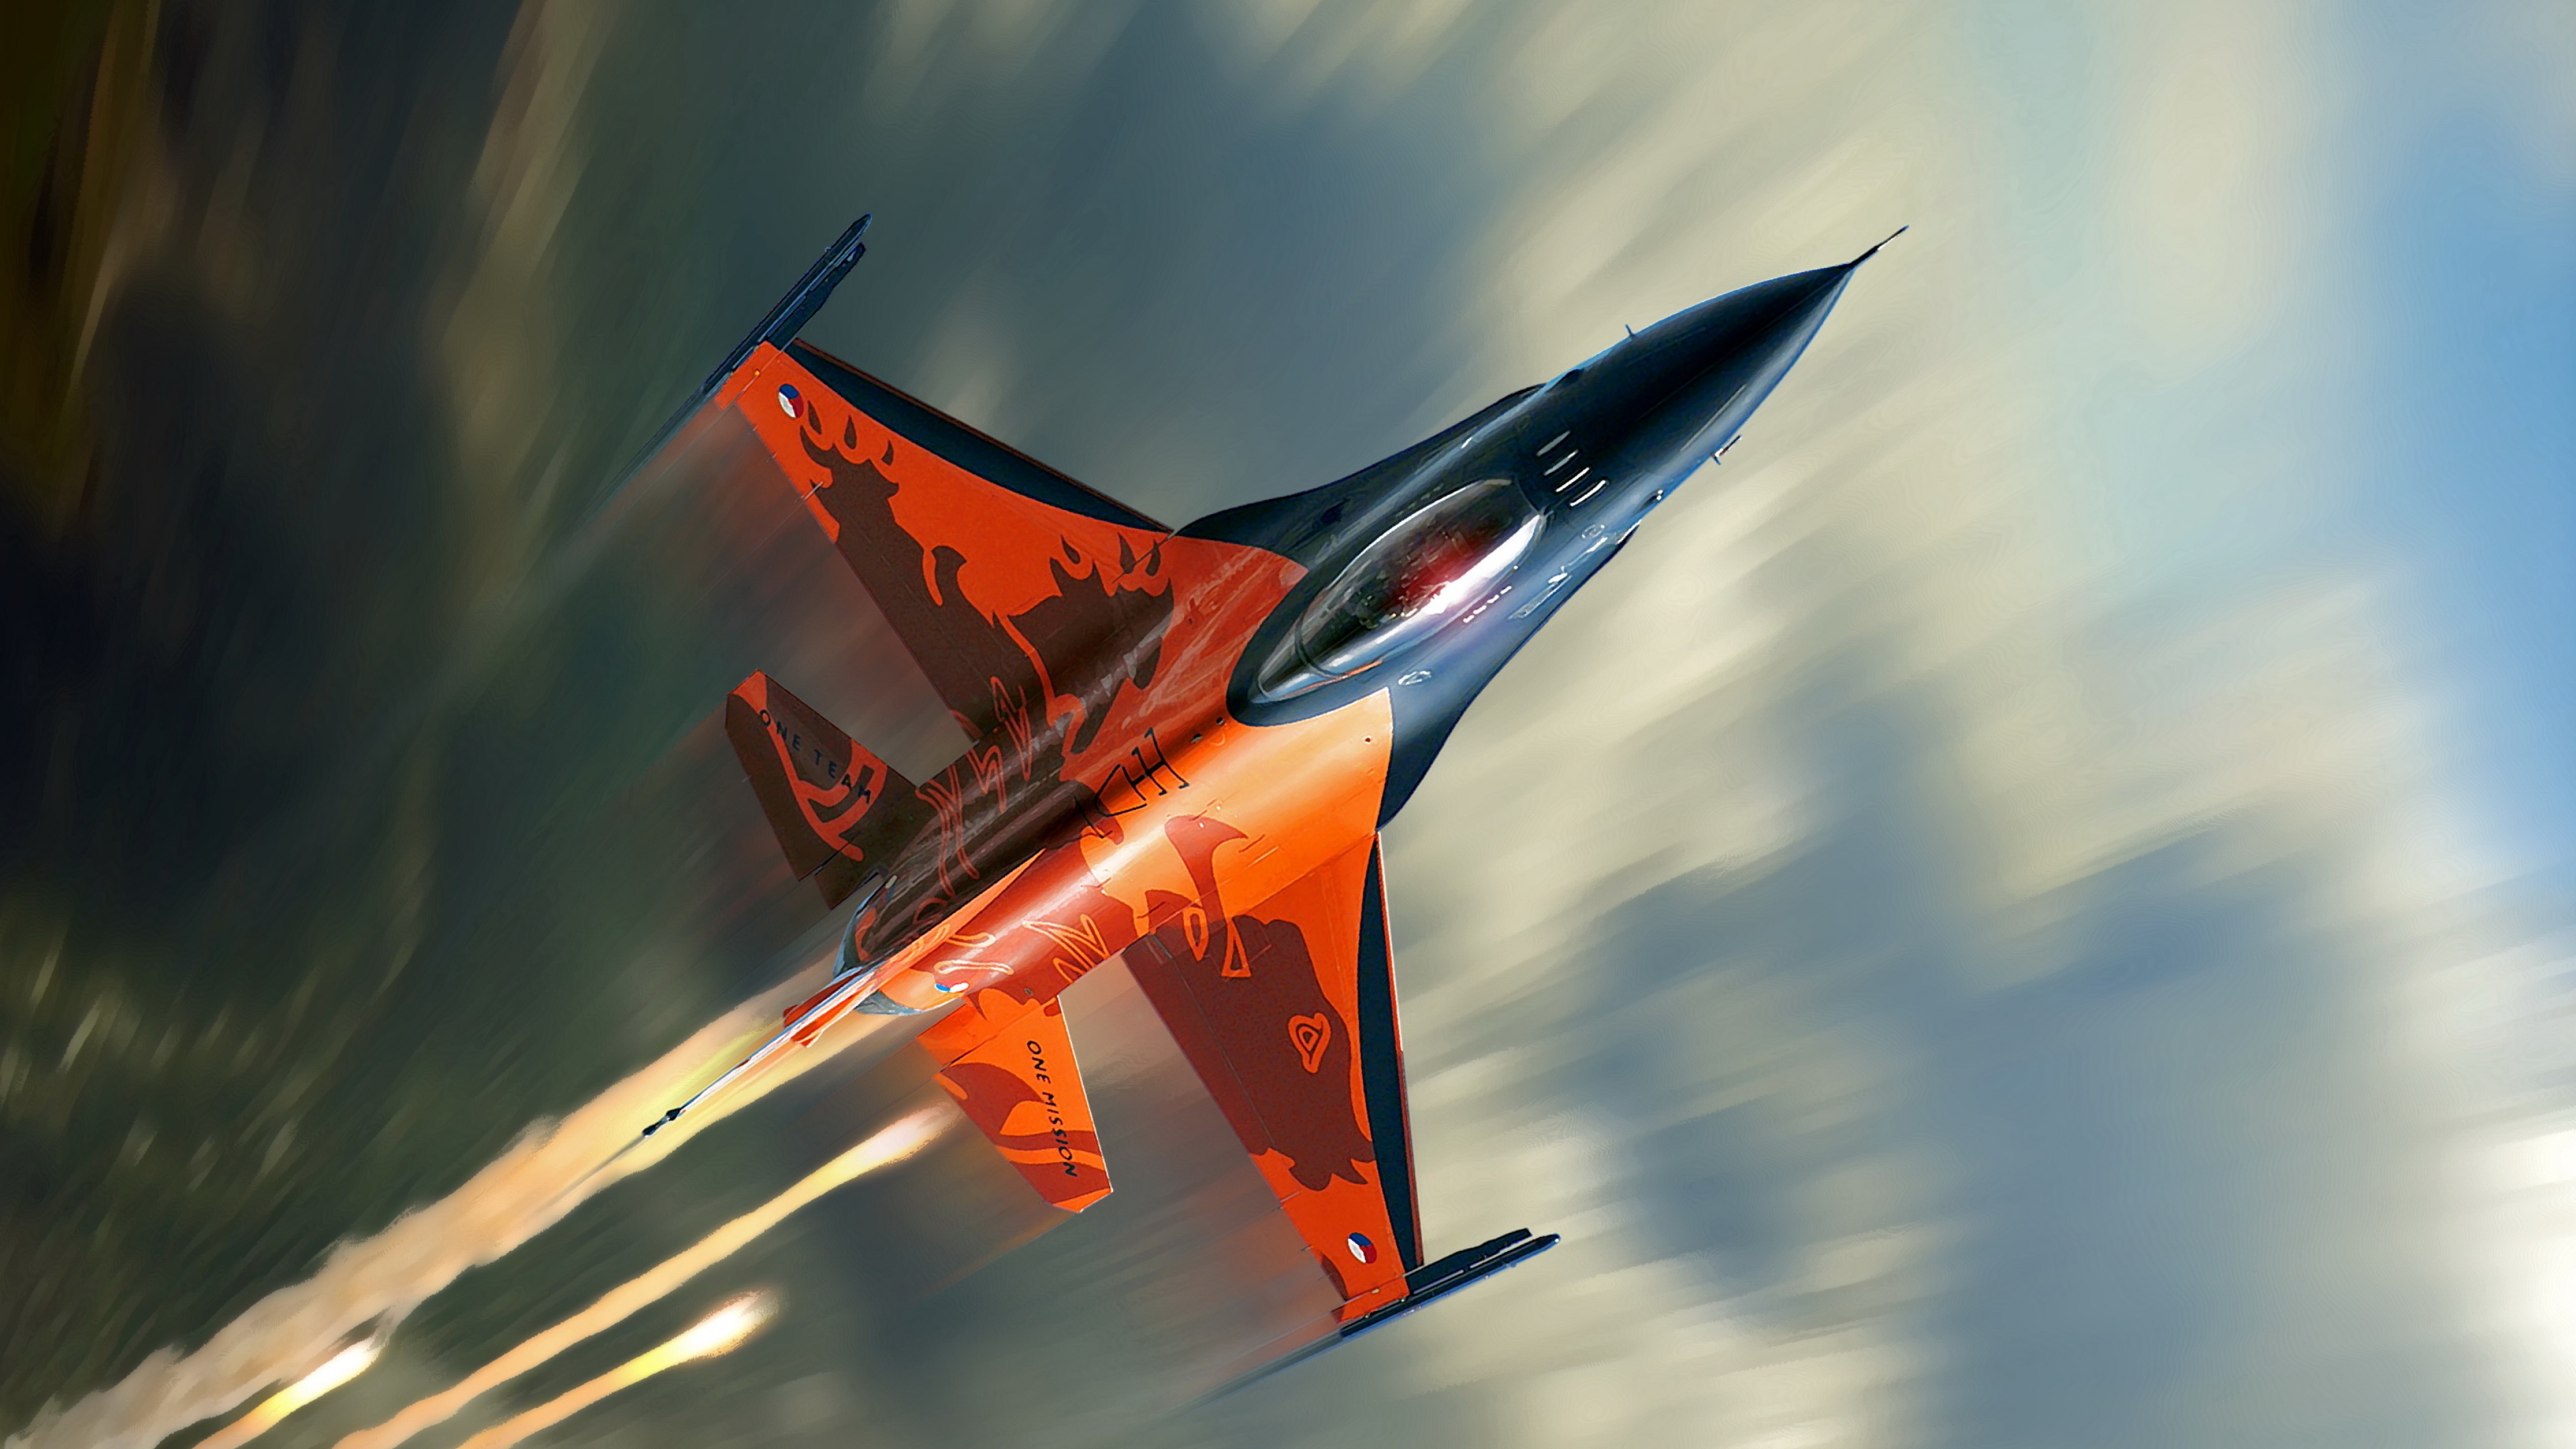 F 16 Falcon Fighter Jet Aircraft Us Air Force Wallpaper Hd For Mobile Phone  5120x2880 : 